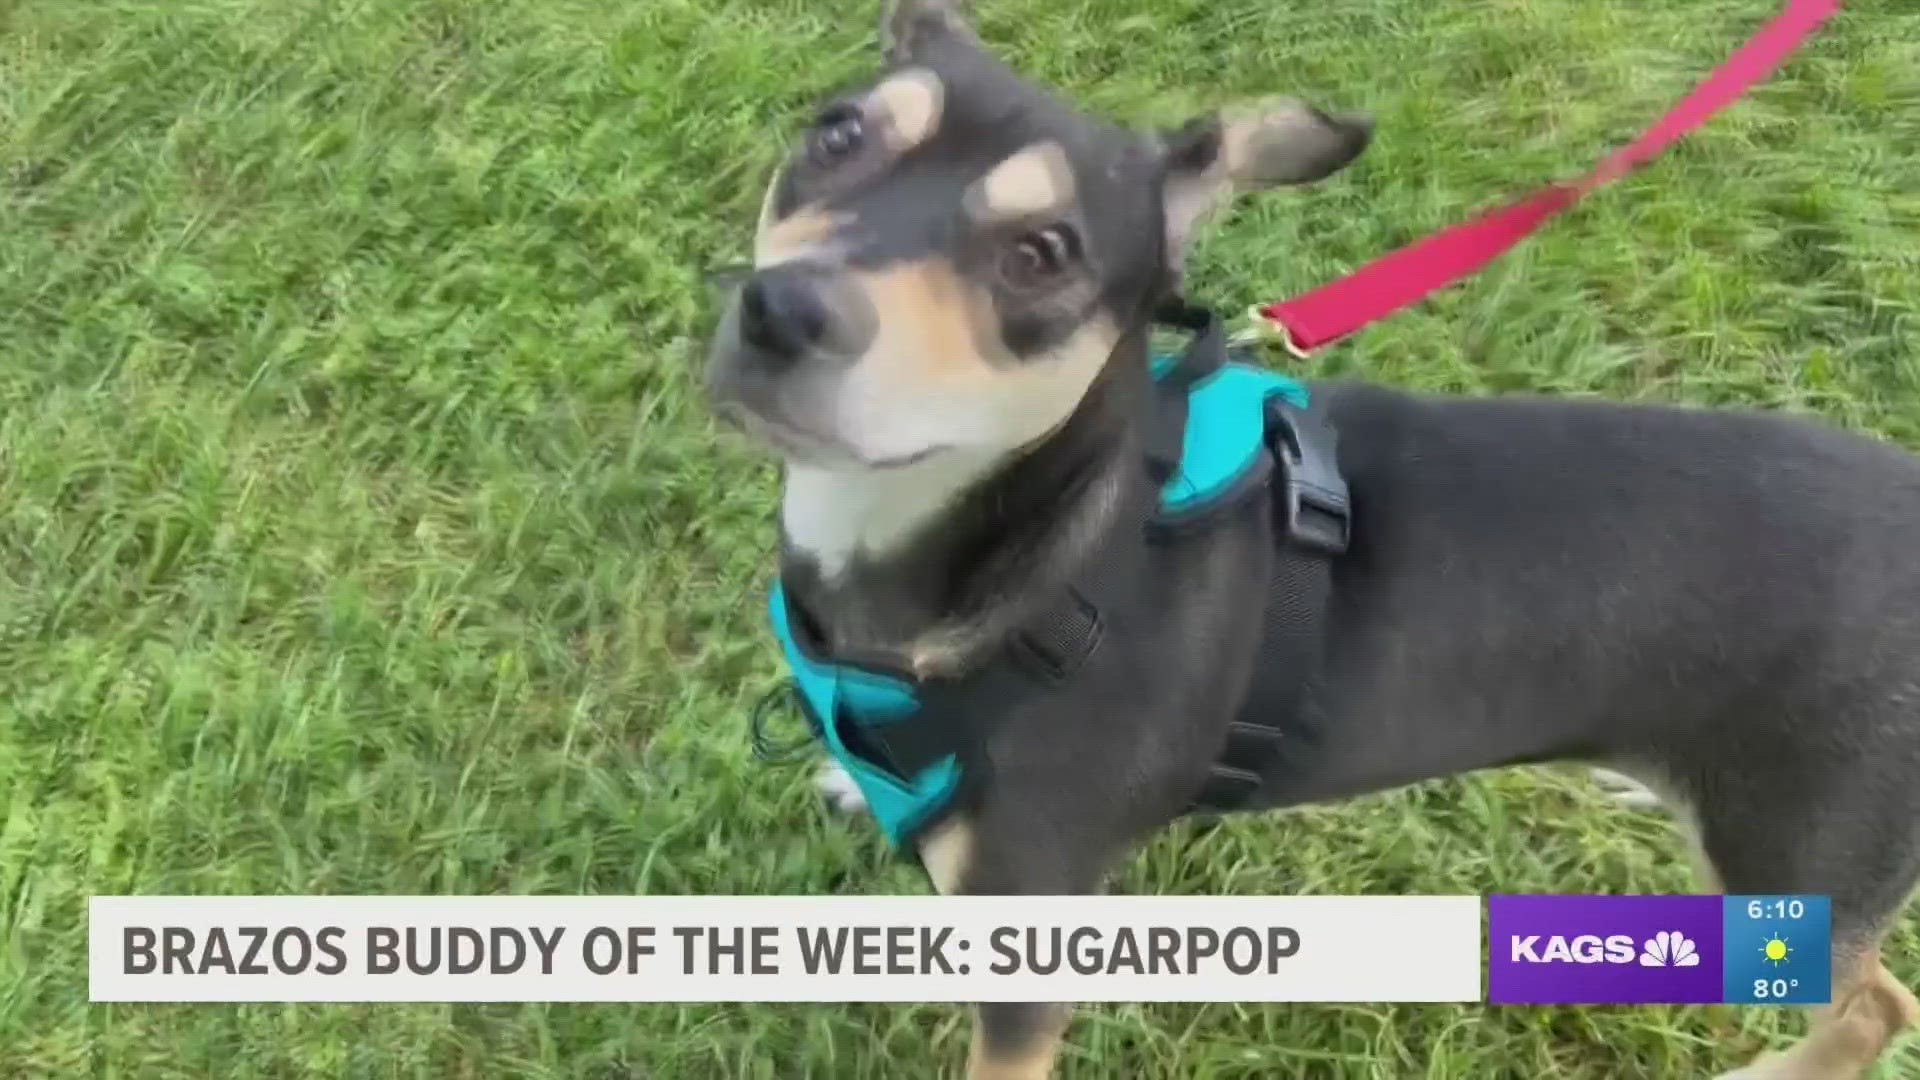 This week's featured Brazos Buddy is Sugar Pop, a mixed breed Terrier pup that's looking to be adopted.